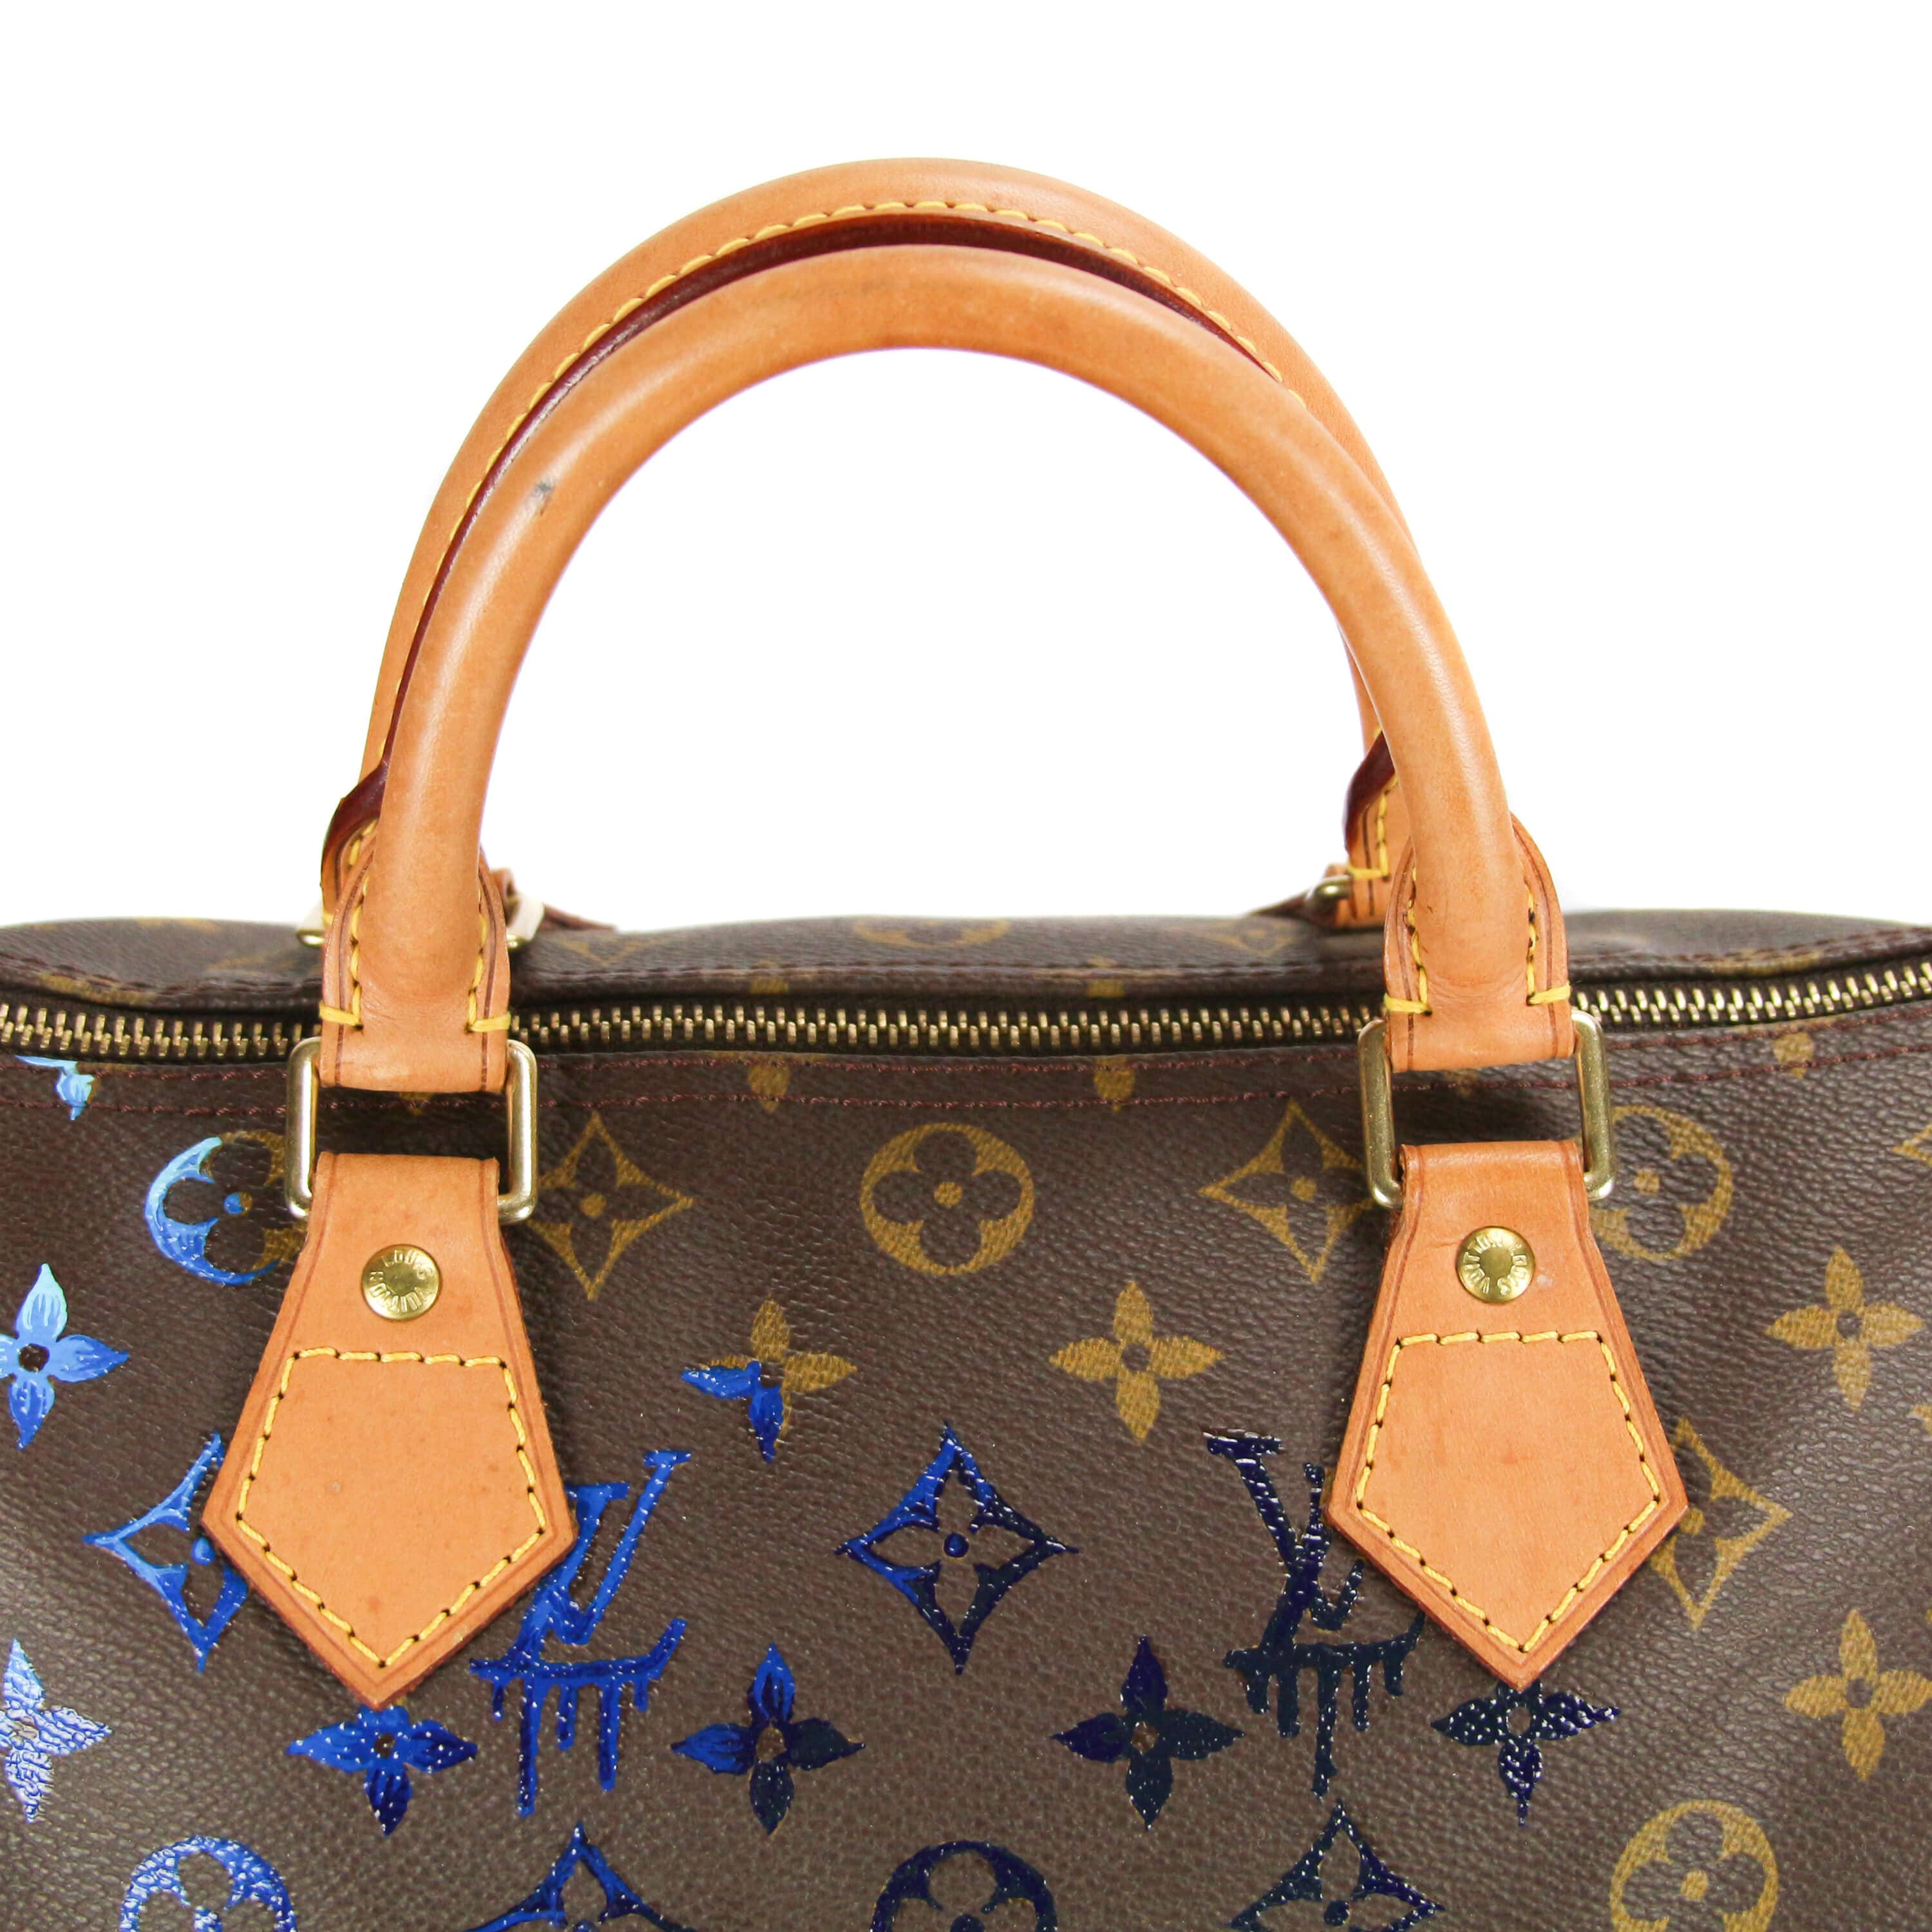 Upcycled Louis Vuitton Speedy 30 Monogram Canvas - Blue Specter in